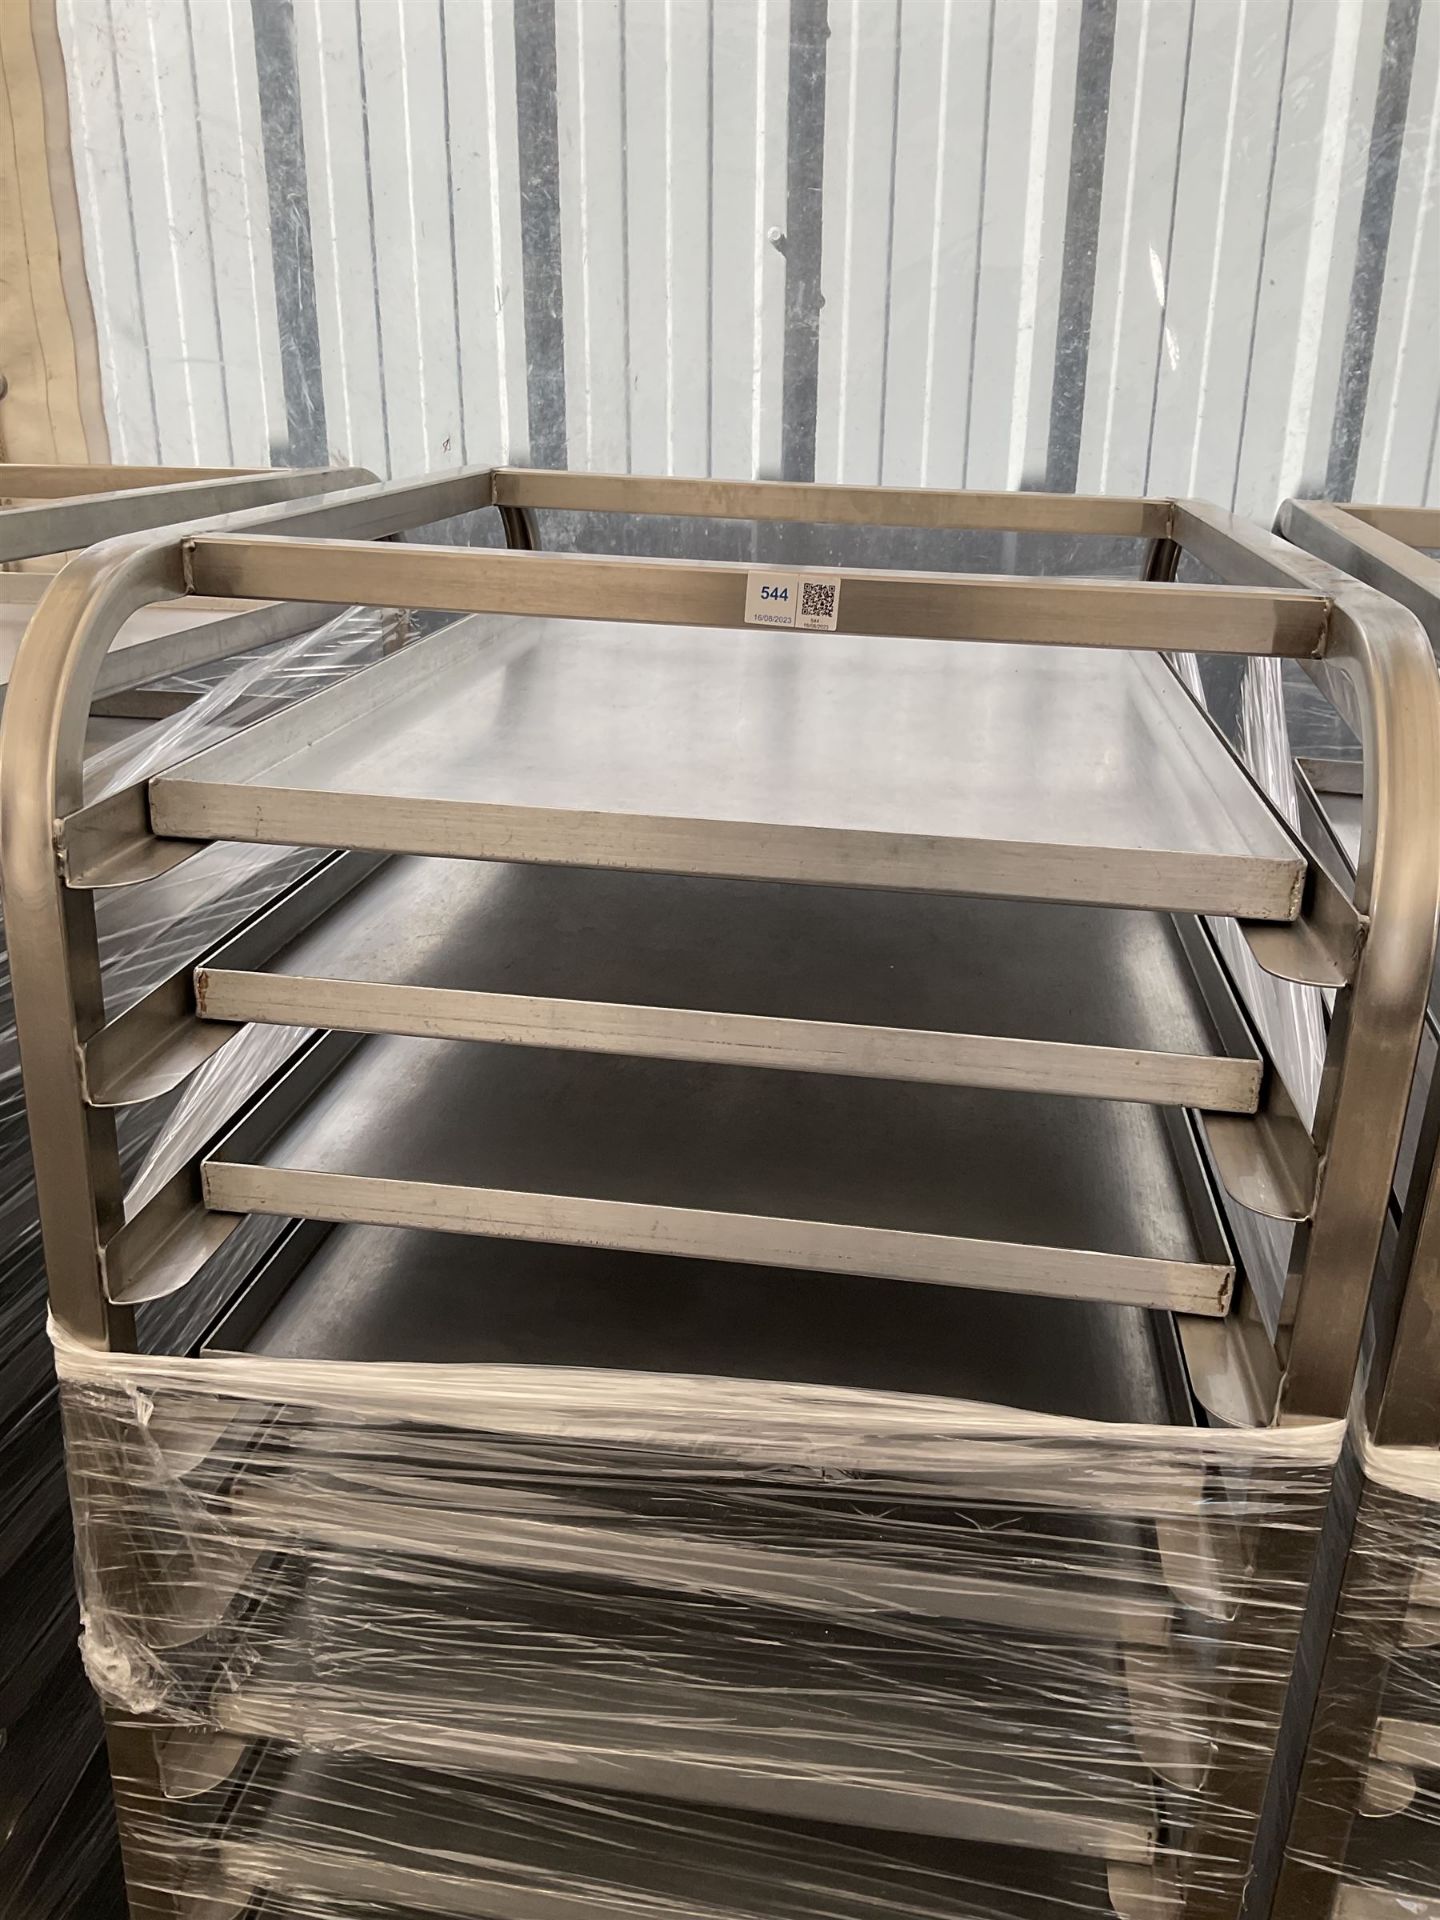 Stainless steel commercial tray rack trolley - Image 2 of 3